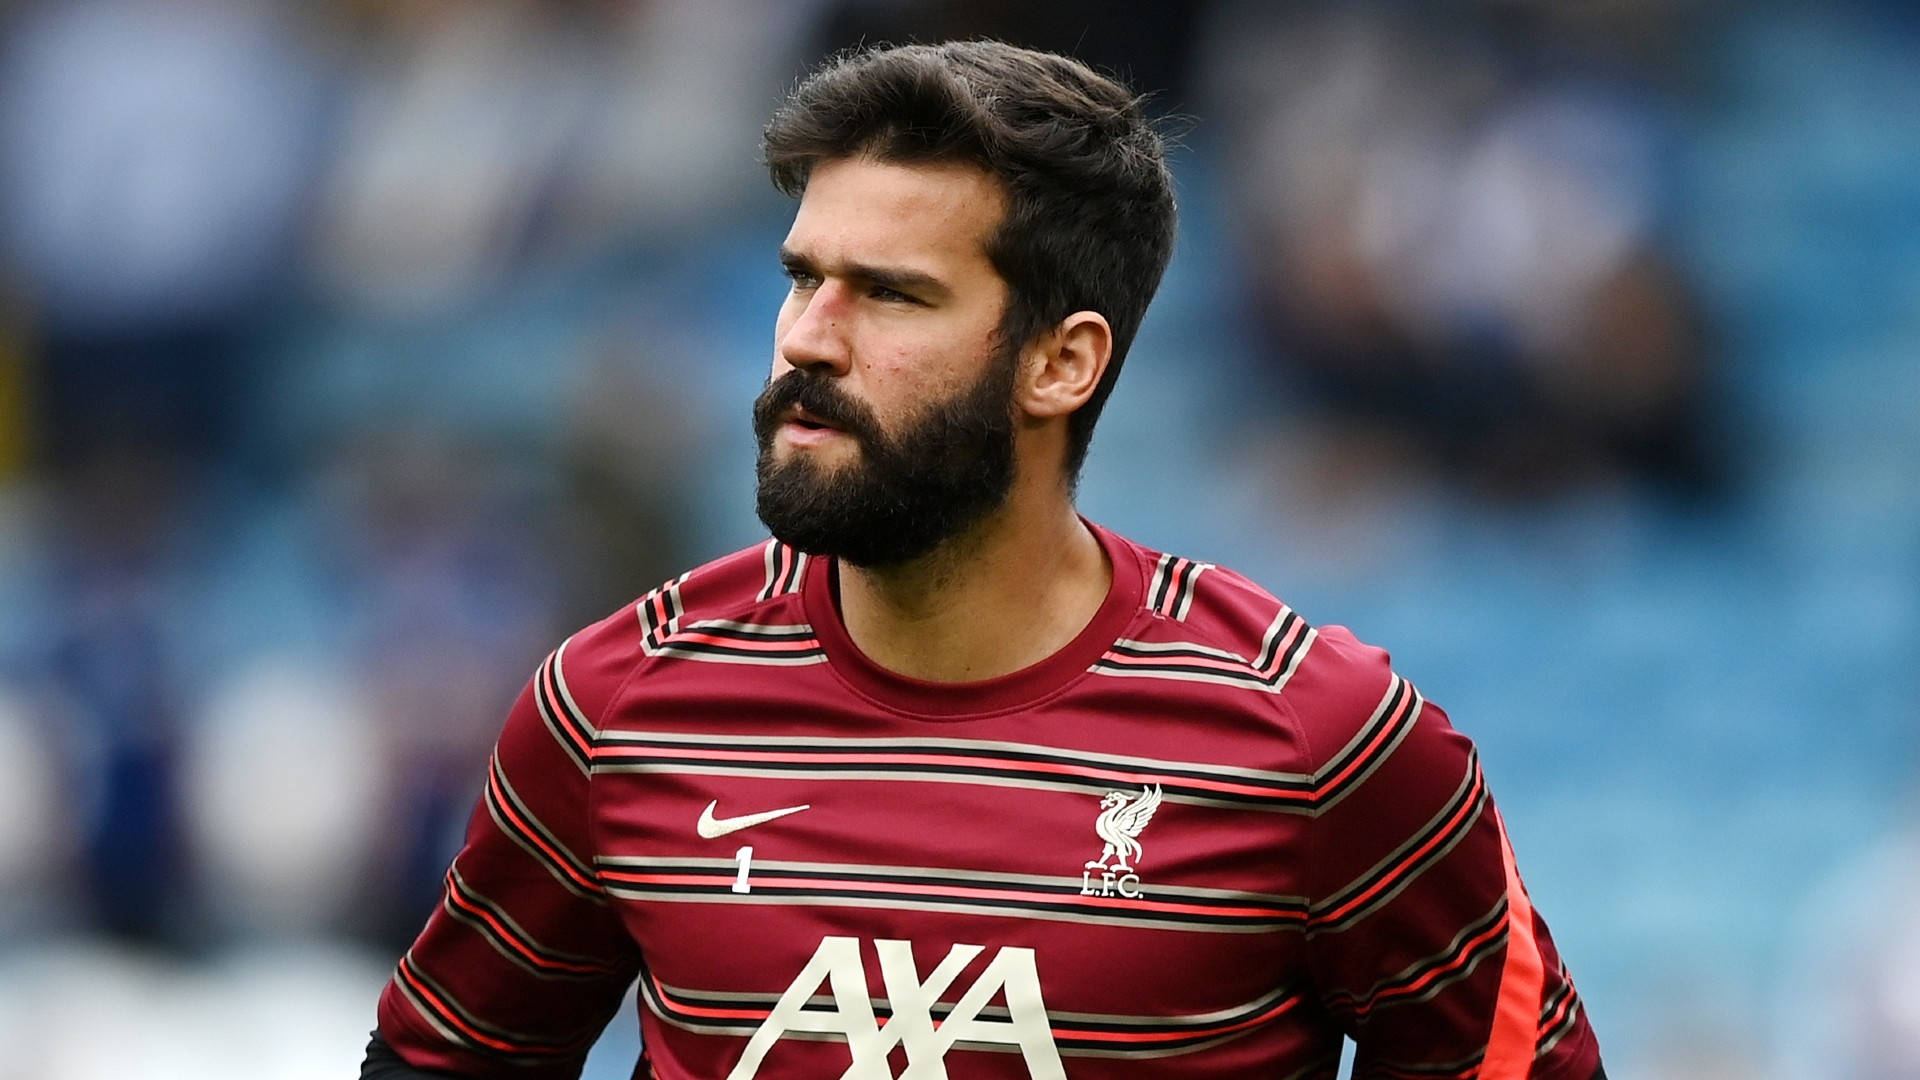 Top 999+ Alisson Becker Wallpapers Full HD, 4K✅Free to Use